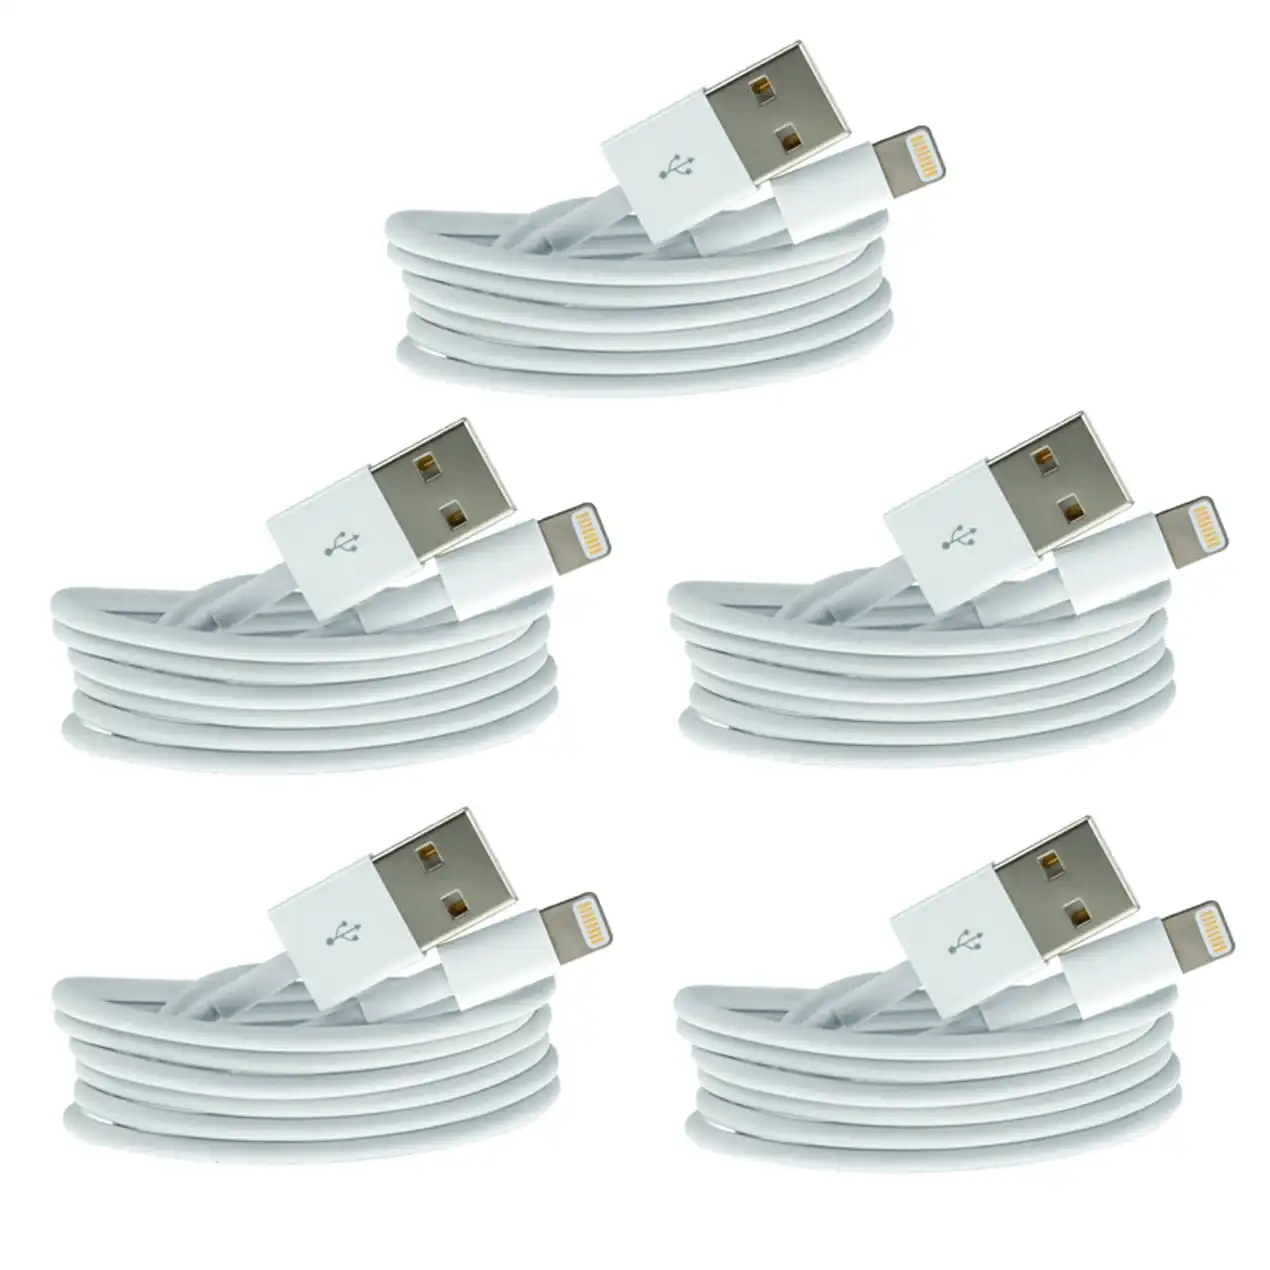 5 Pc 1M Usb Data Charge Cable Lightning Pin Connector For Apple Iphone Ipad 5X